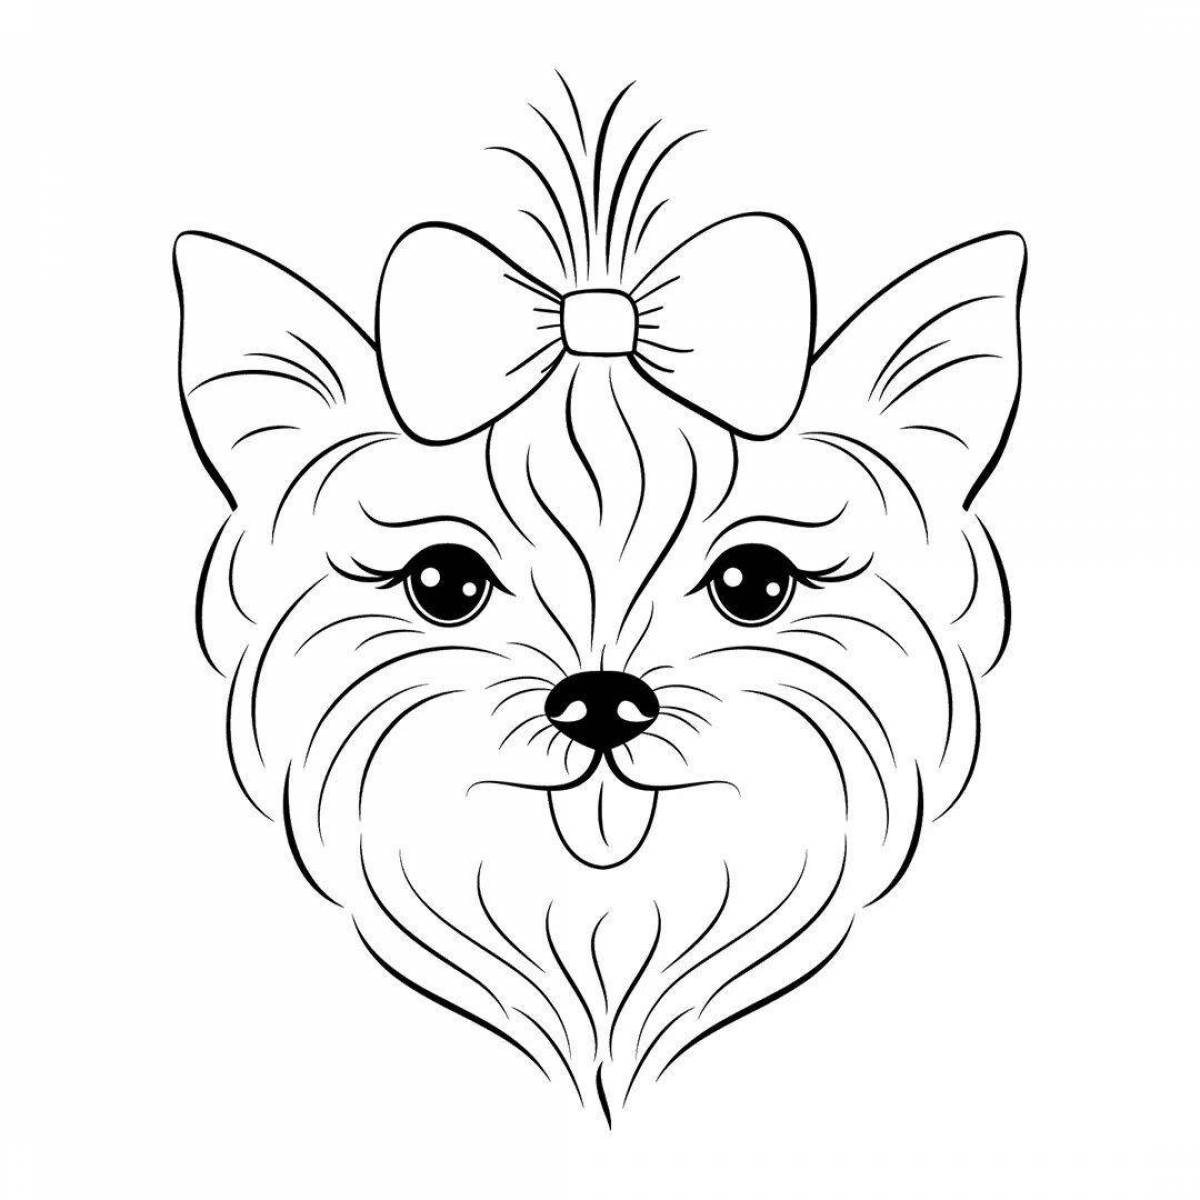 Coloring page of a sociable york dog